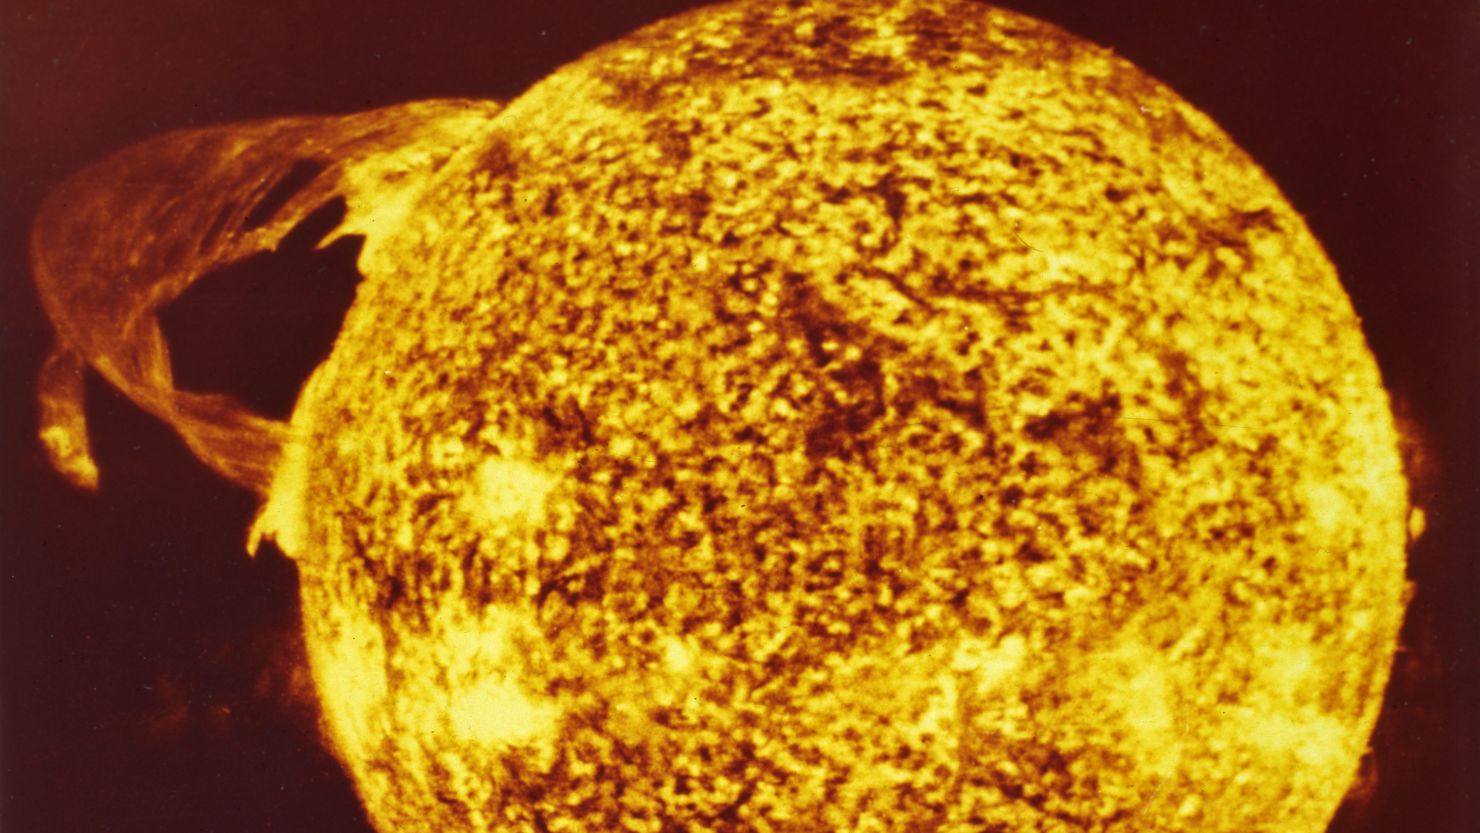 A solar flare on the surface of the sun, caused by the sudden release of energy from the magnetic field, 1974